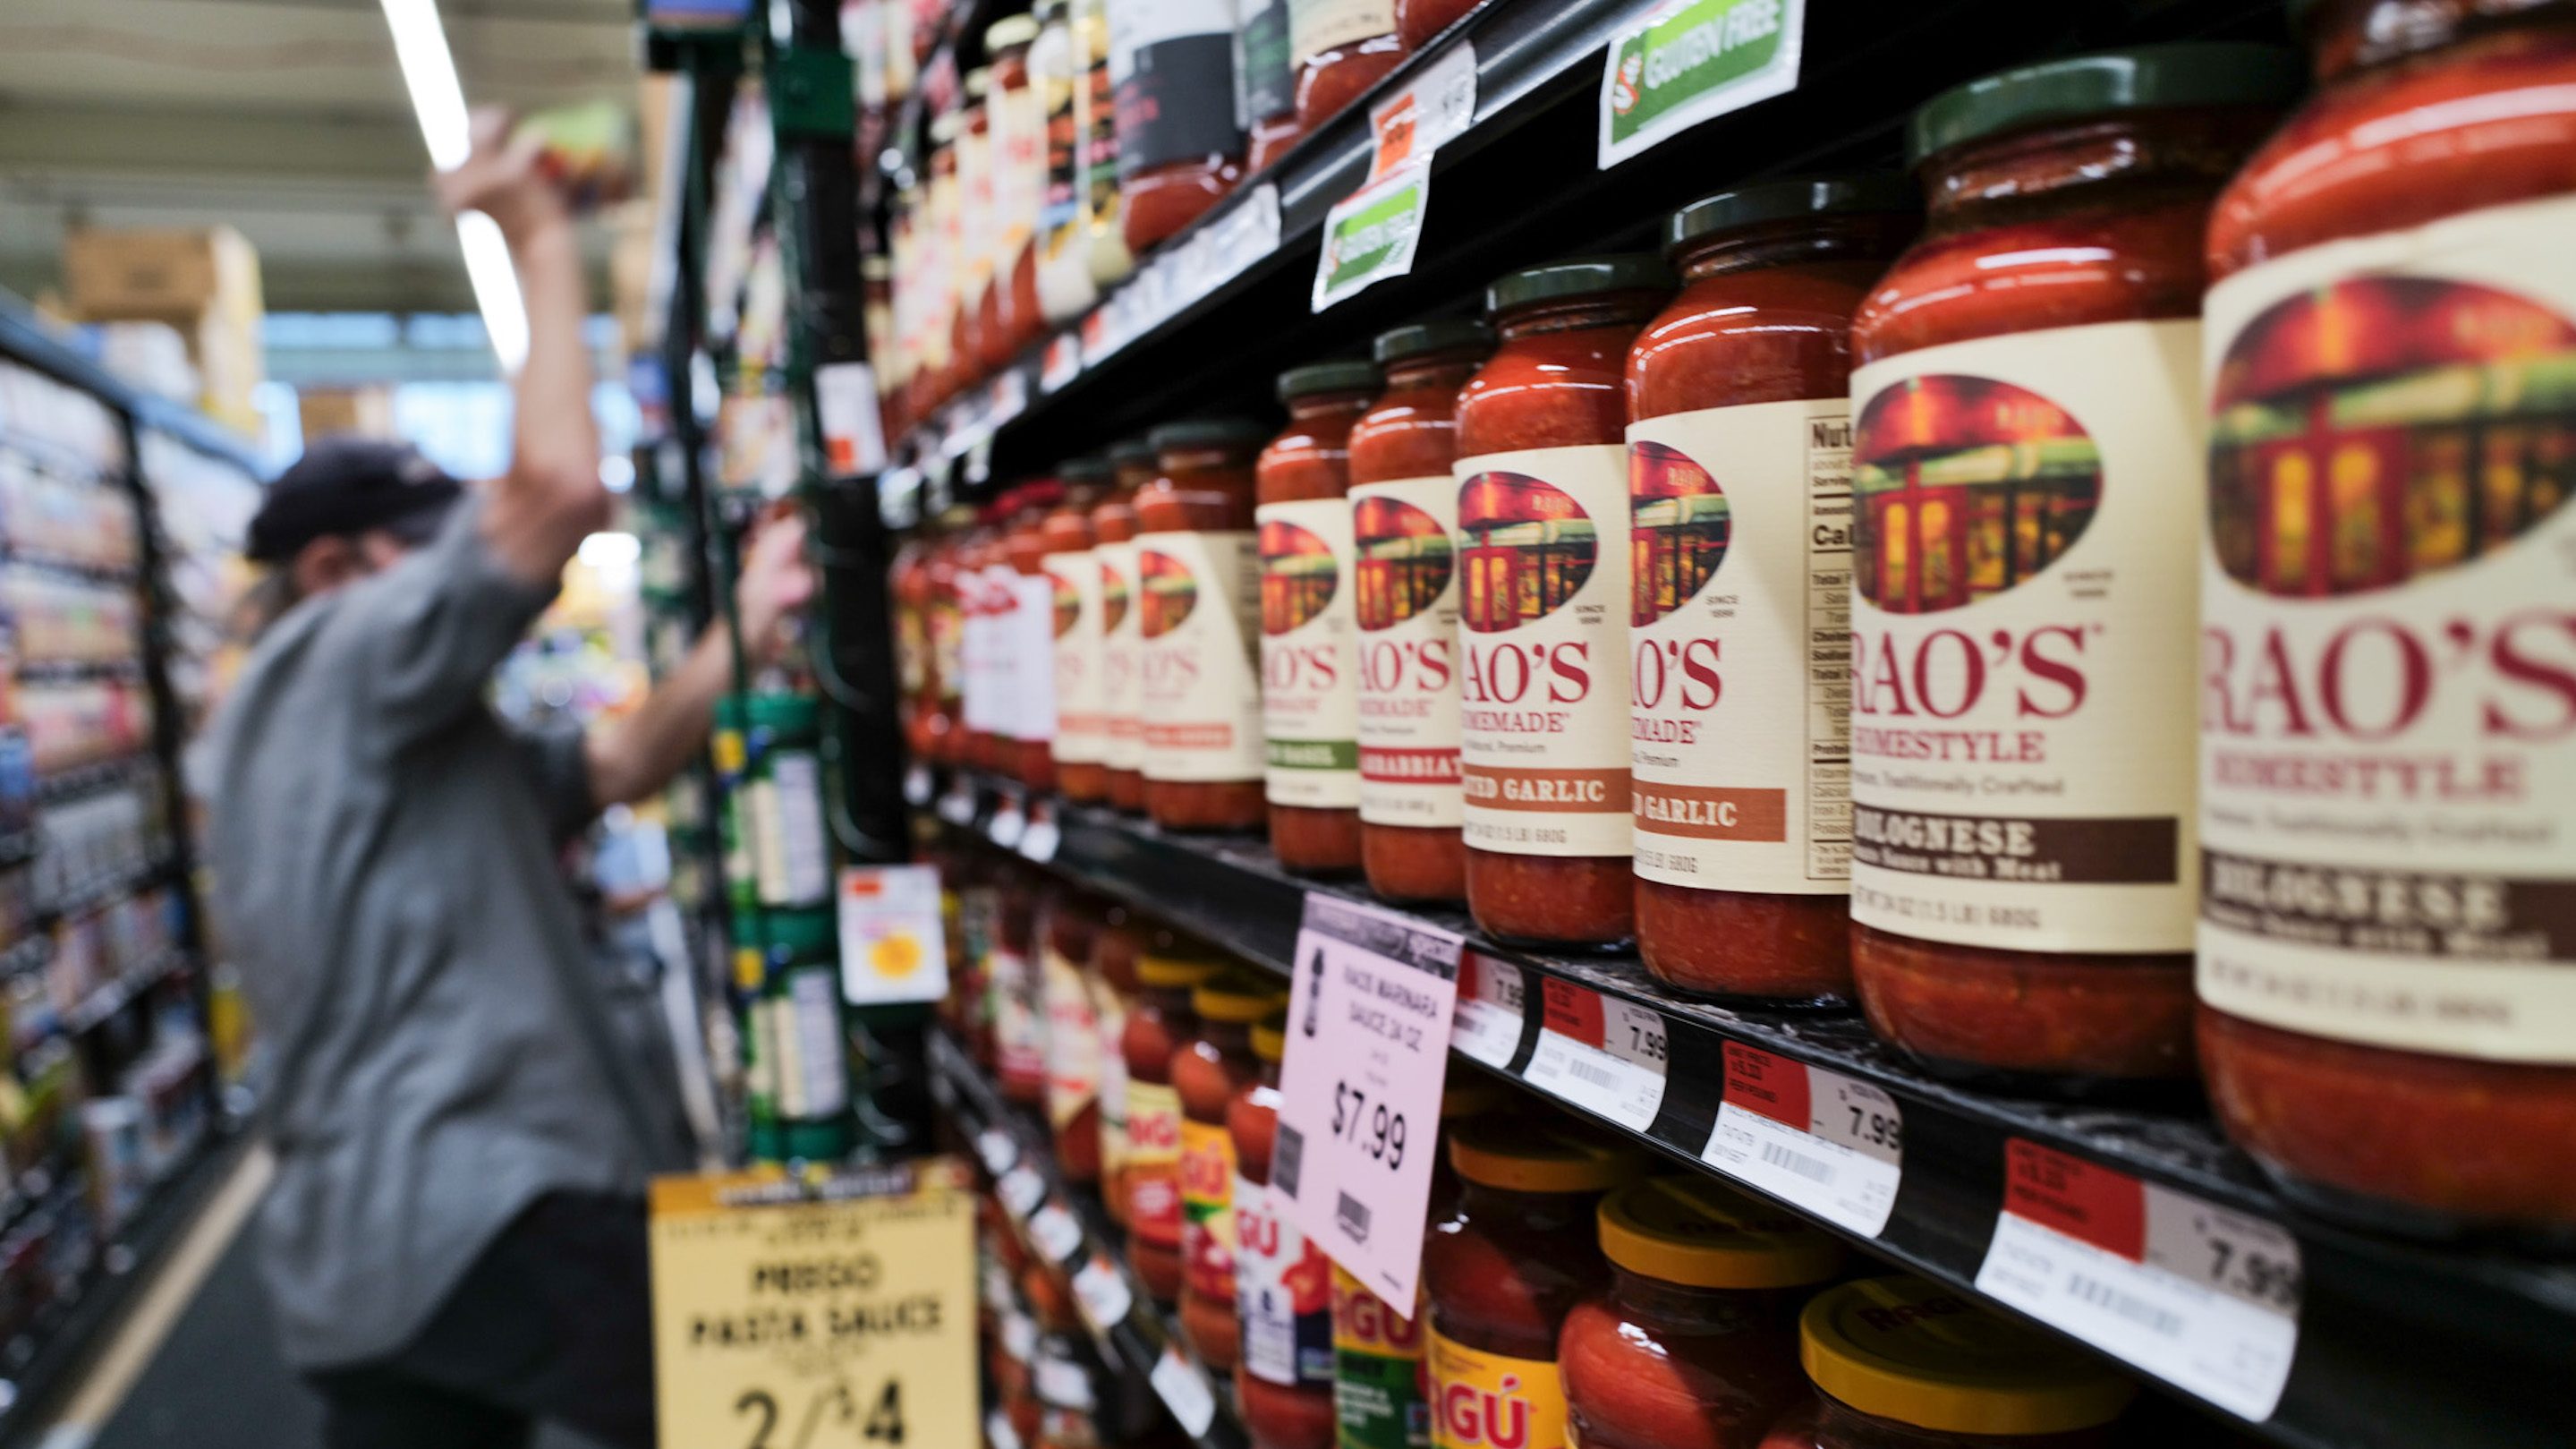 Campbell Soup buys firm behind pasta sauce brand Rao's for $2.7billion